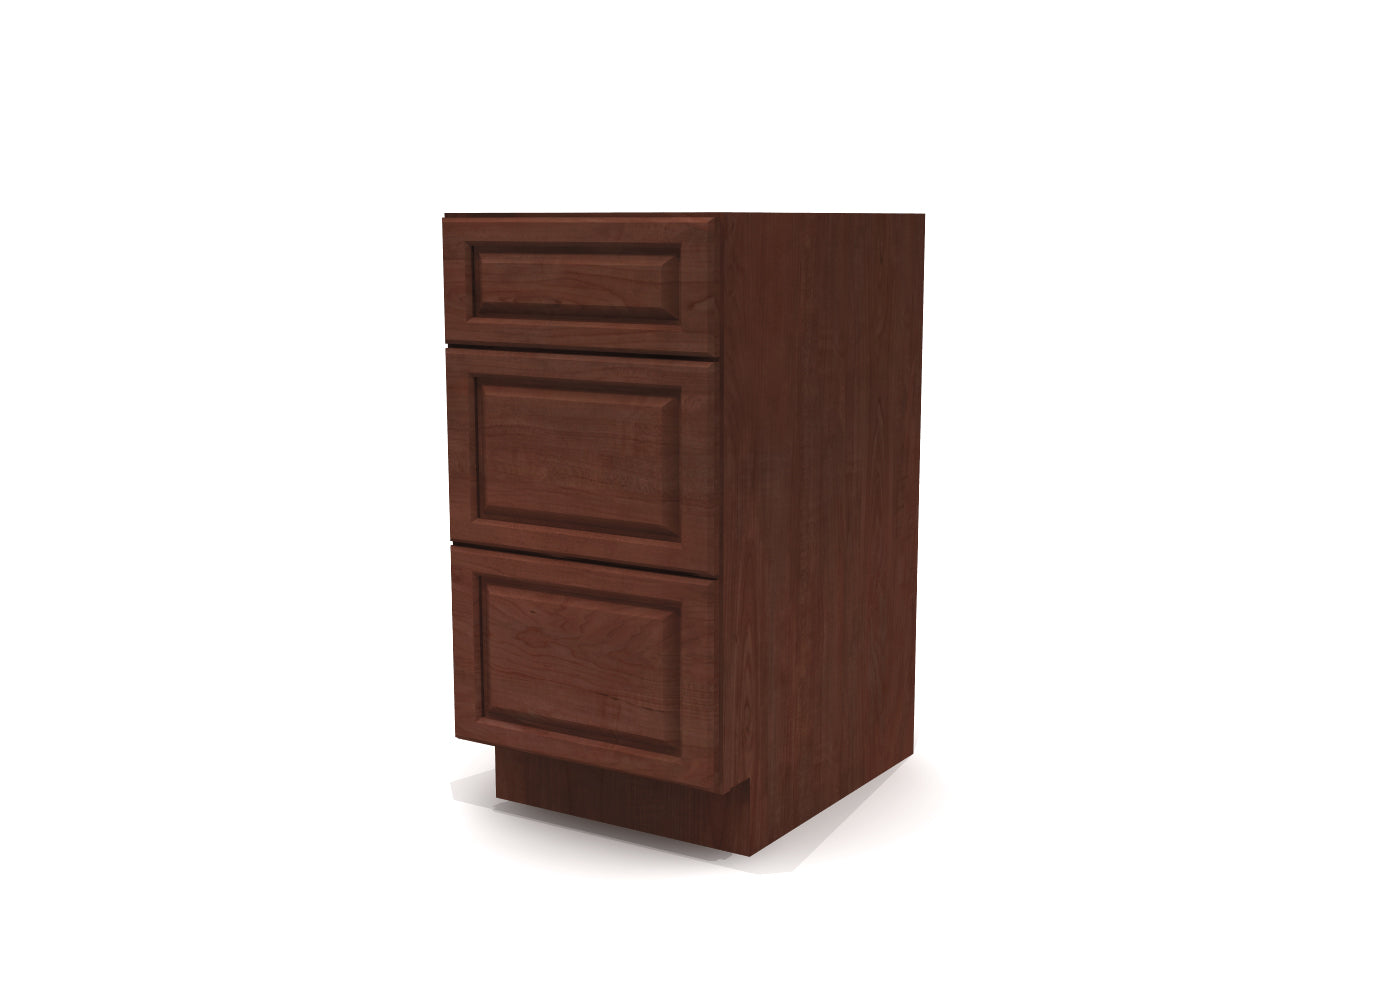 Drawer Base 18" Wide Cherry Raised Panel Cabinet